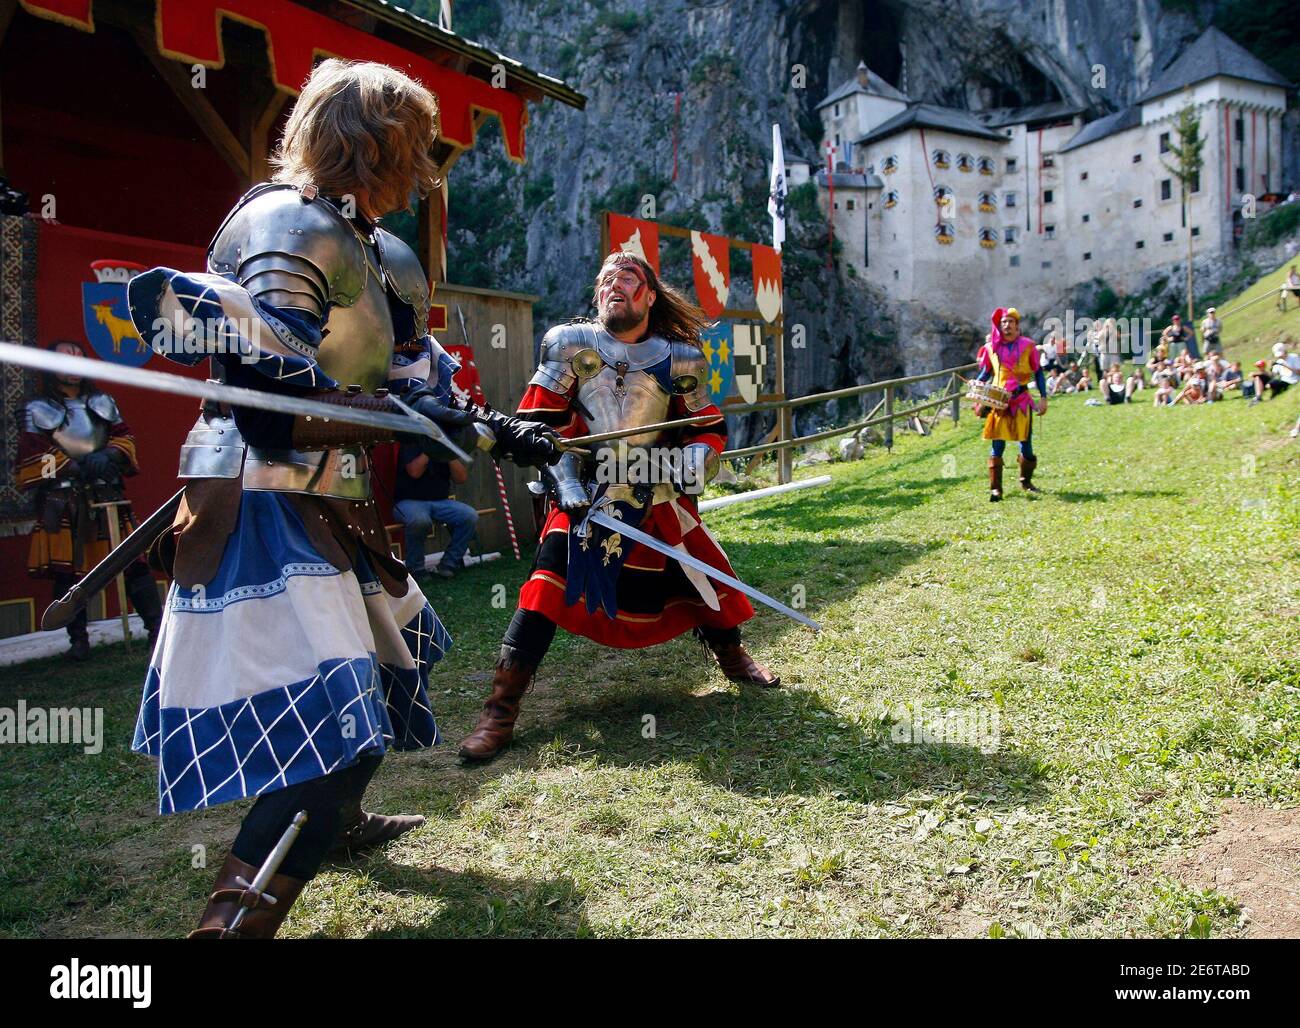 Dressed As Medieval Knights Fight High Resolution Stock Photography and  Images - Alamy